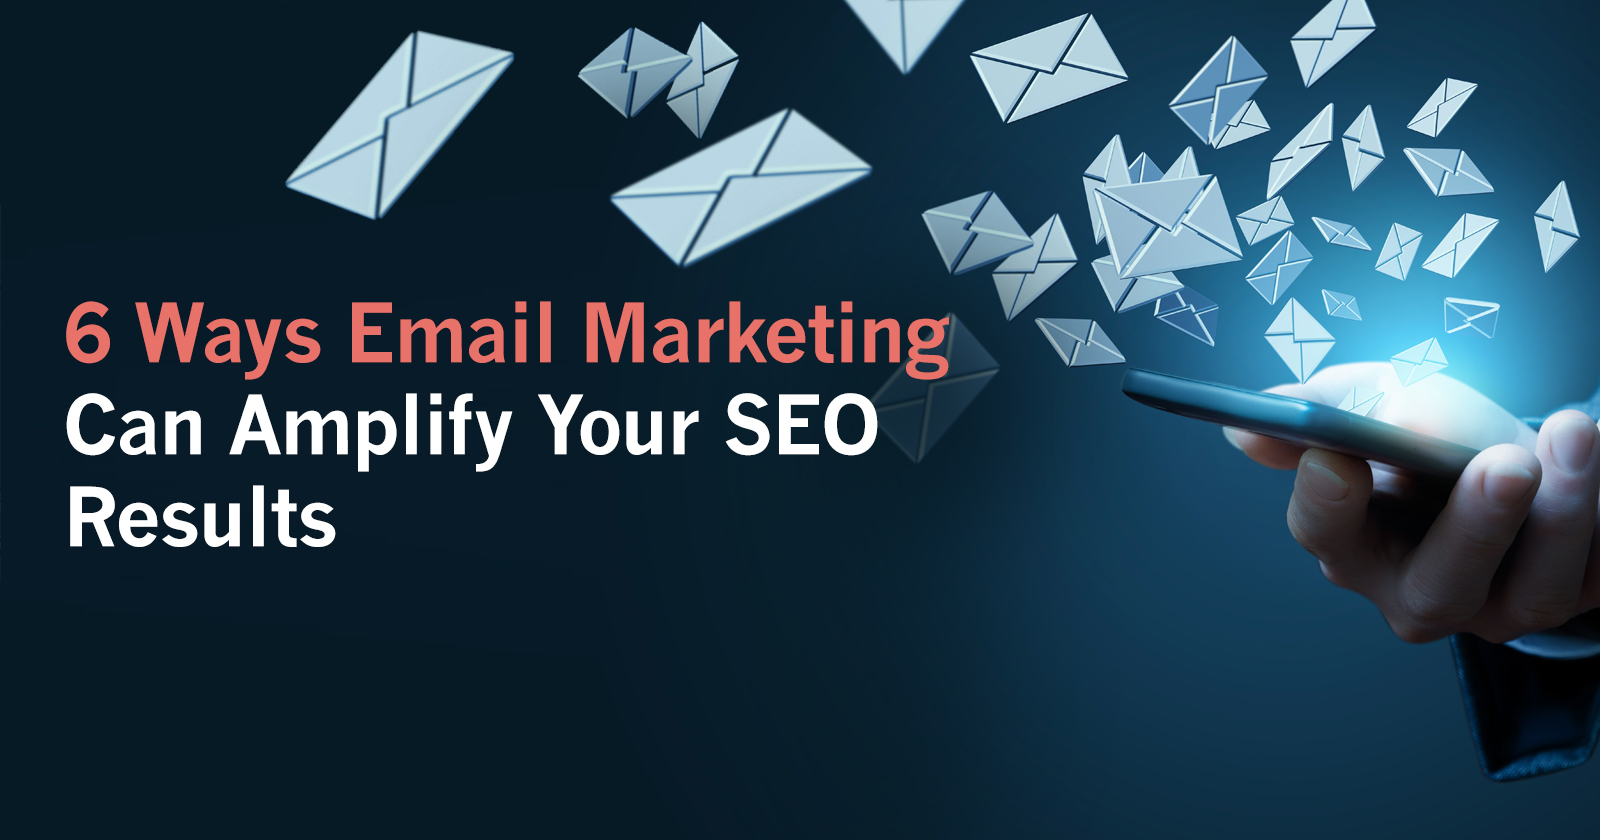 6-Ways-Email-Marketing-Can-Amplify-Your-SEO-Results-Jason-Hennessey.jpg